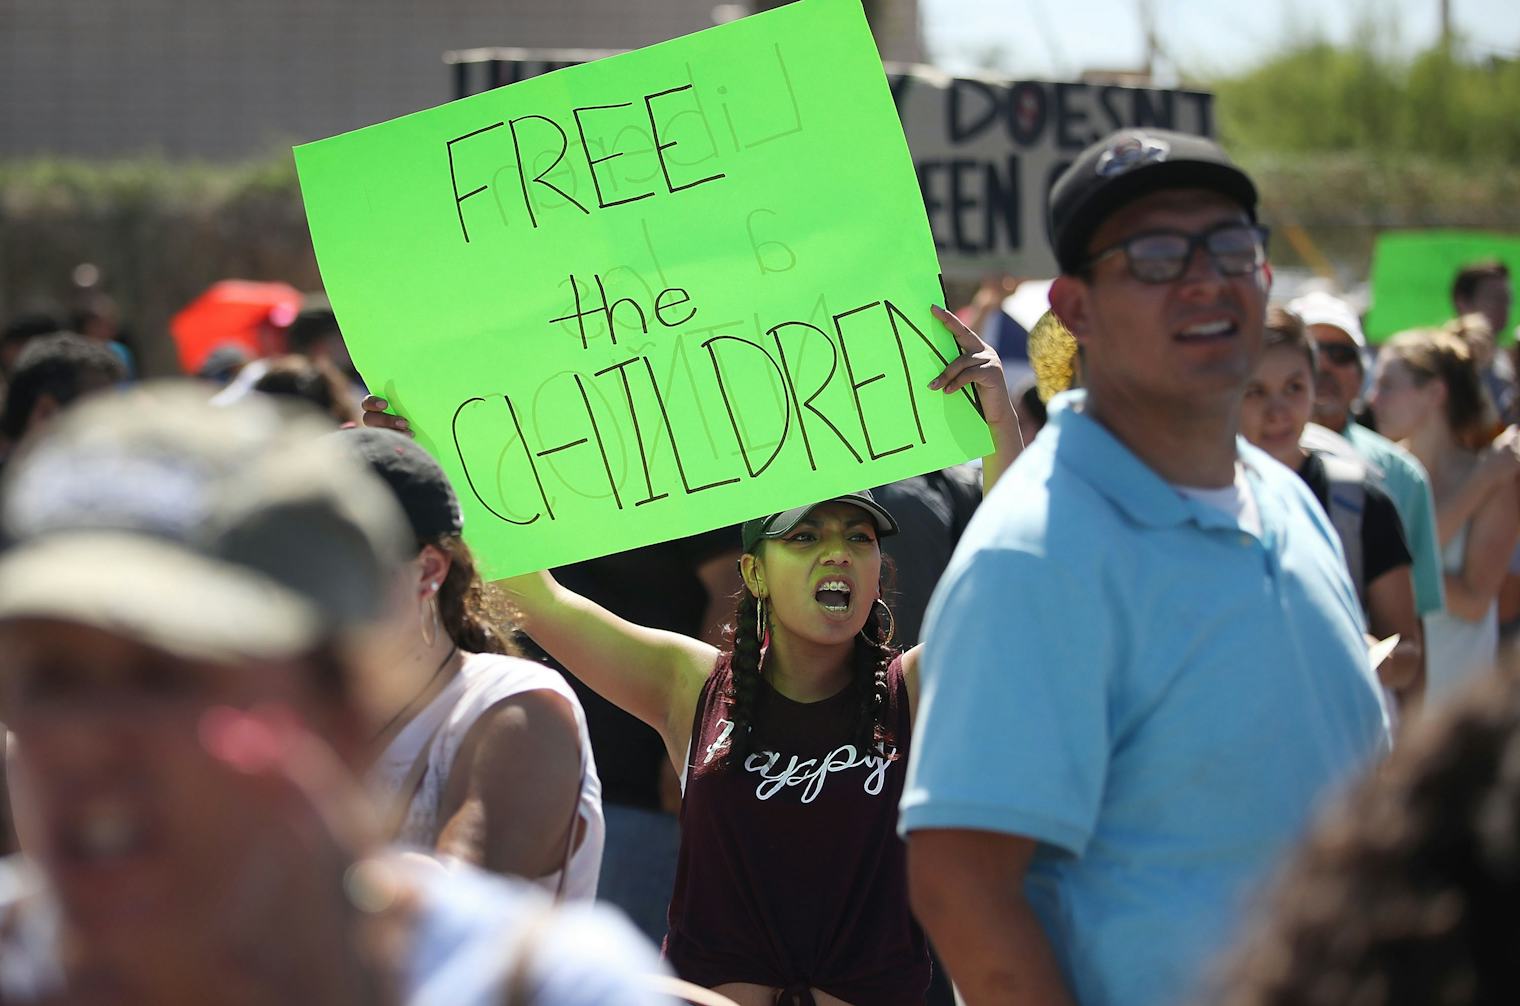 How To Talk About Immigration & Family Separation